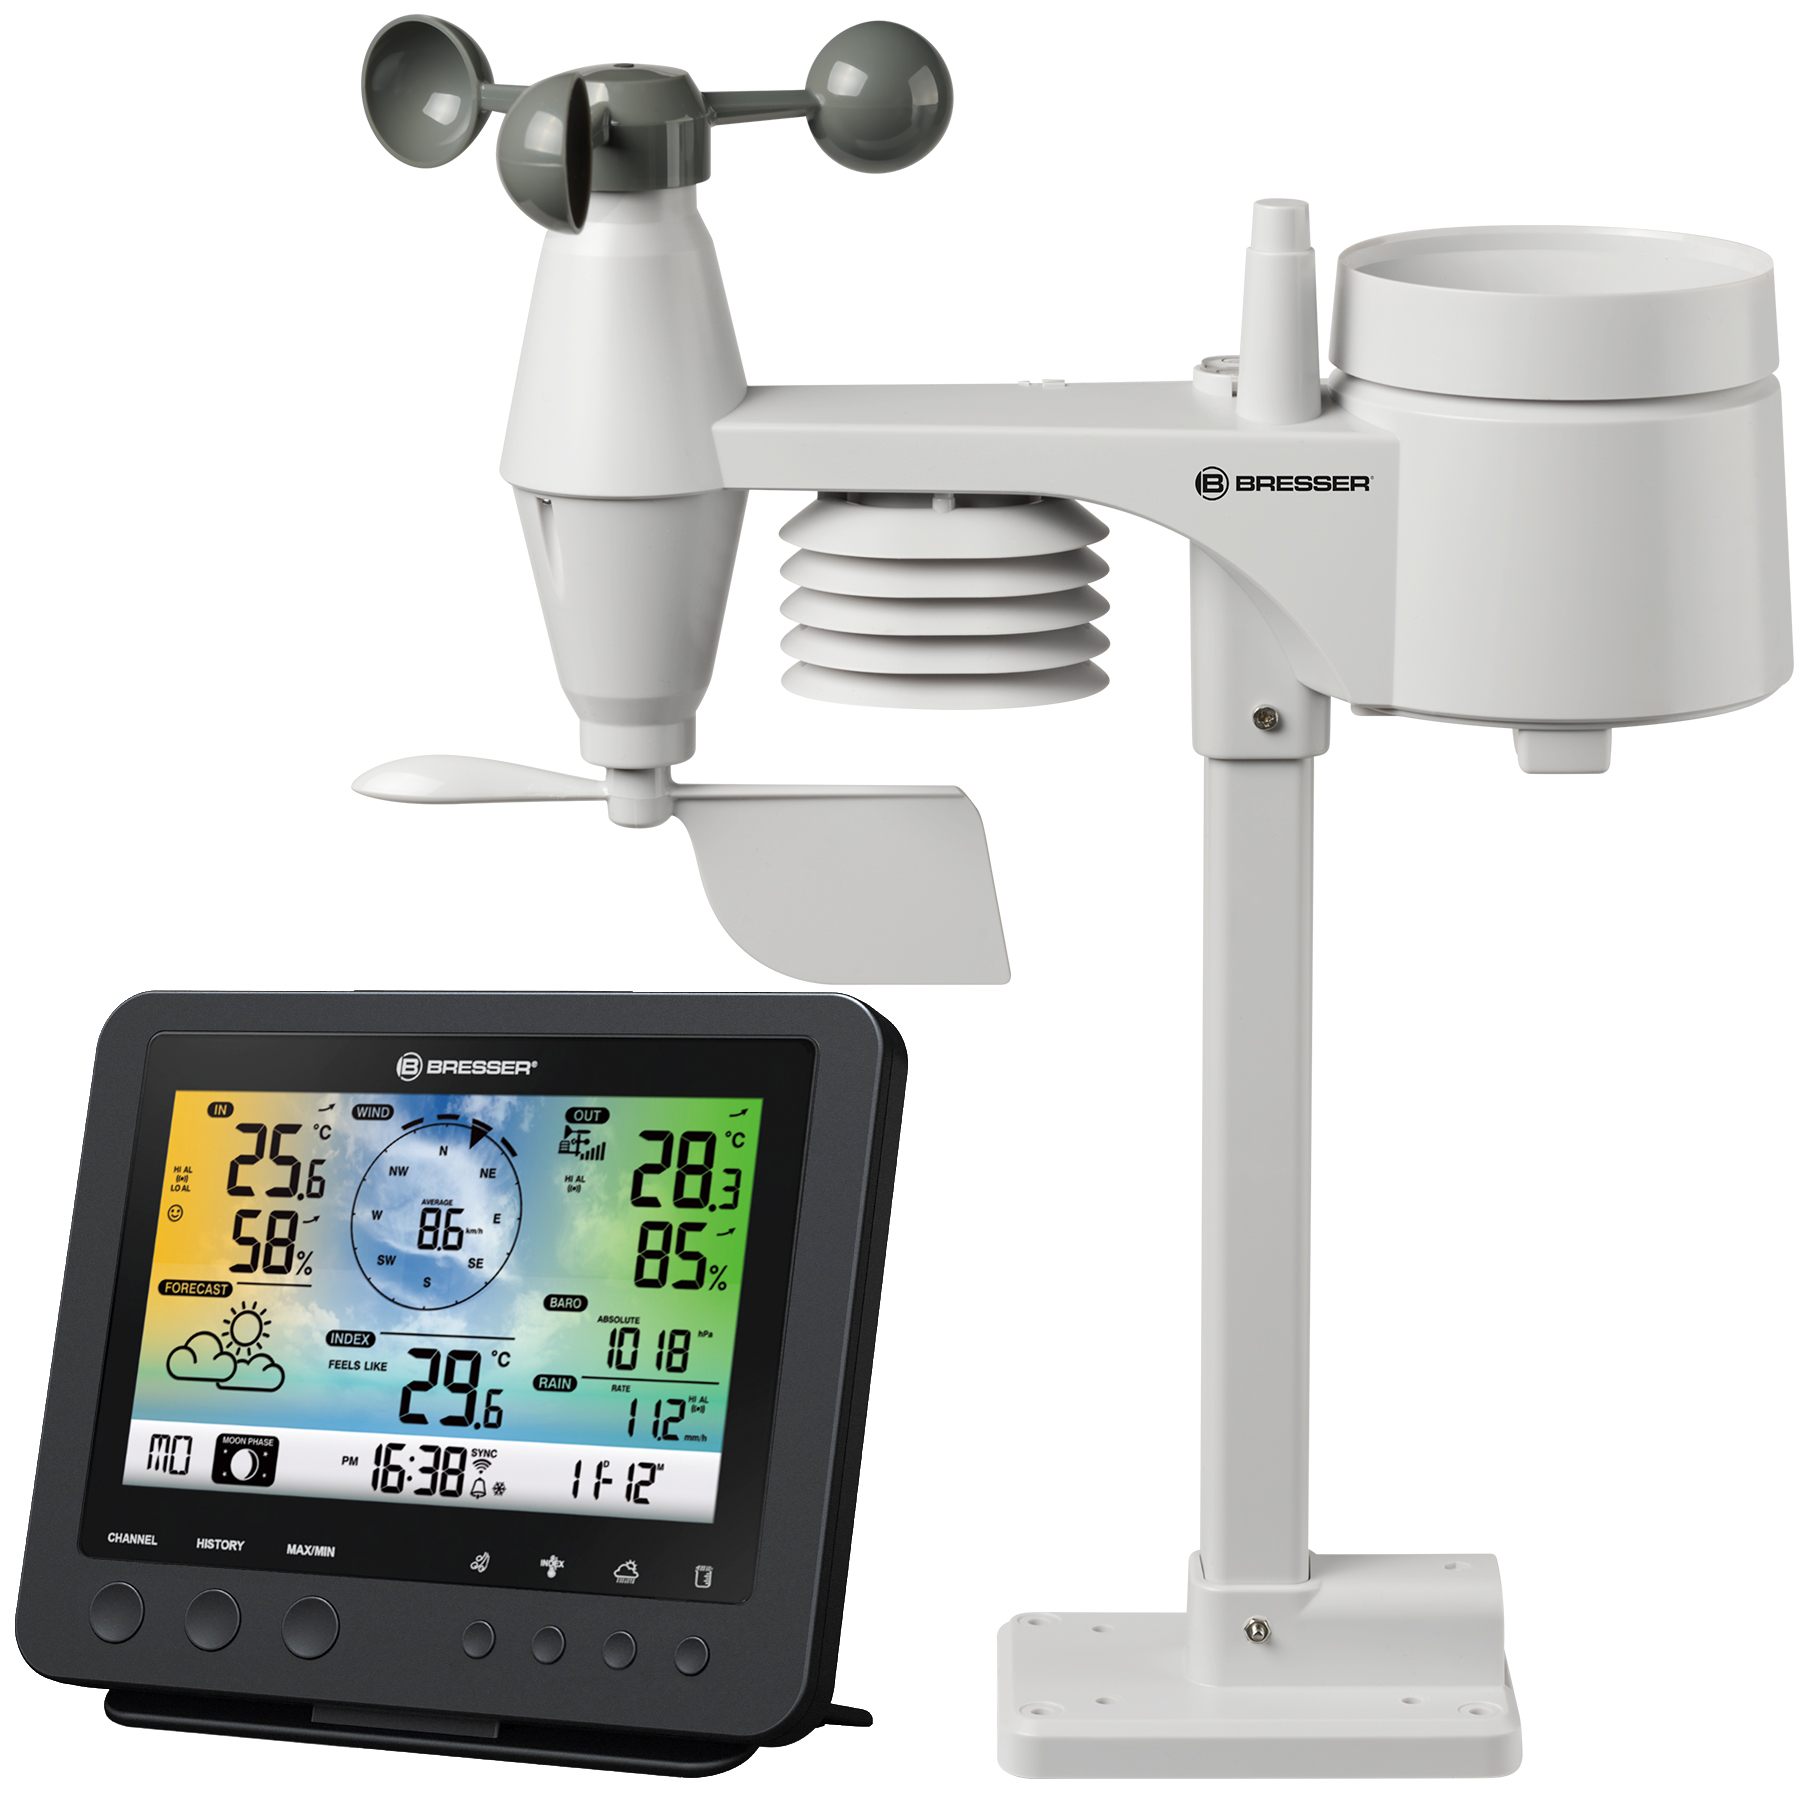 Explore Scientific 5-in-1 WiFi Professional Weather Station with Weather Underground